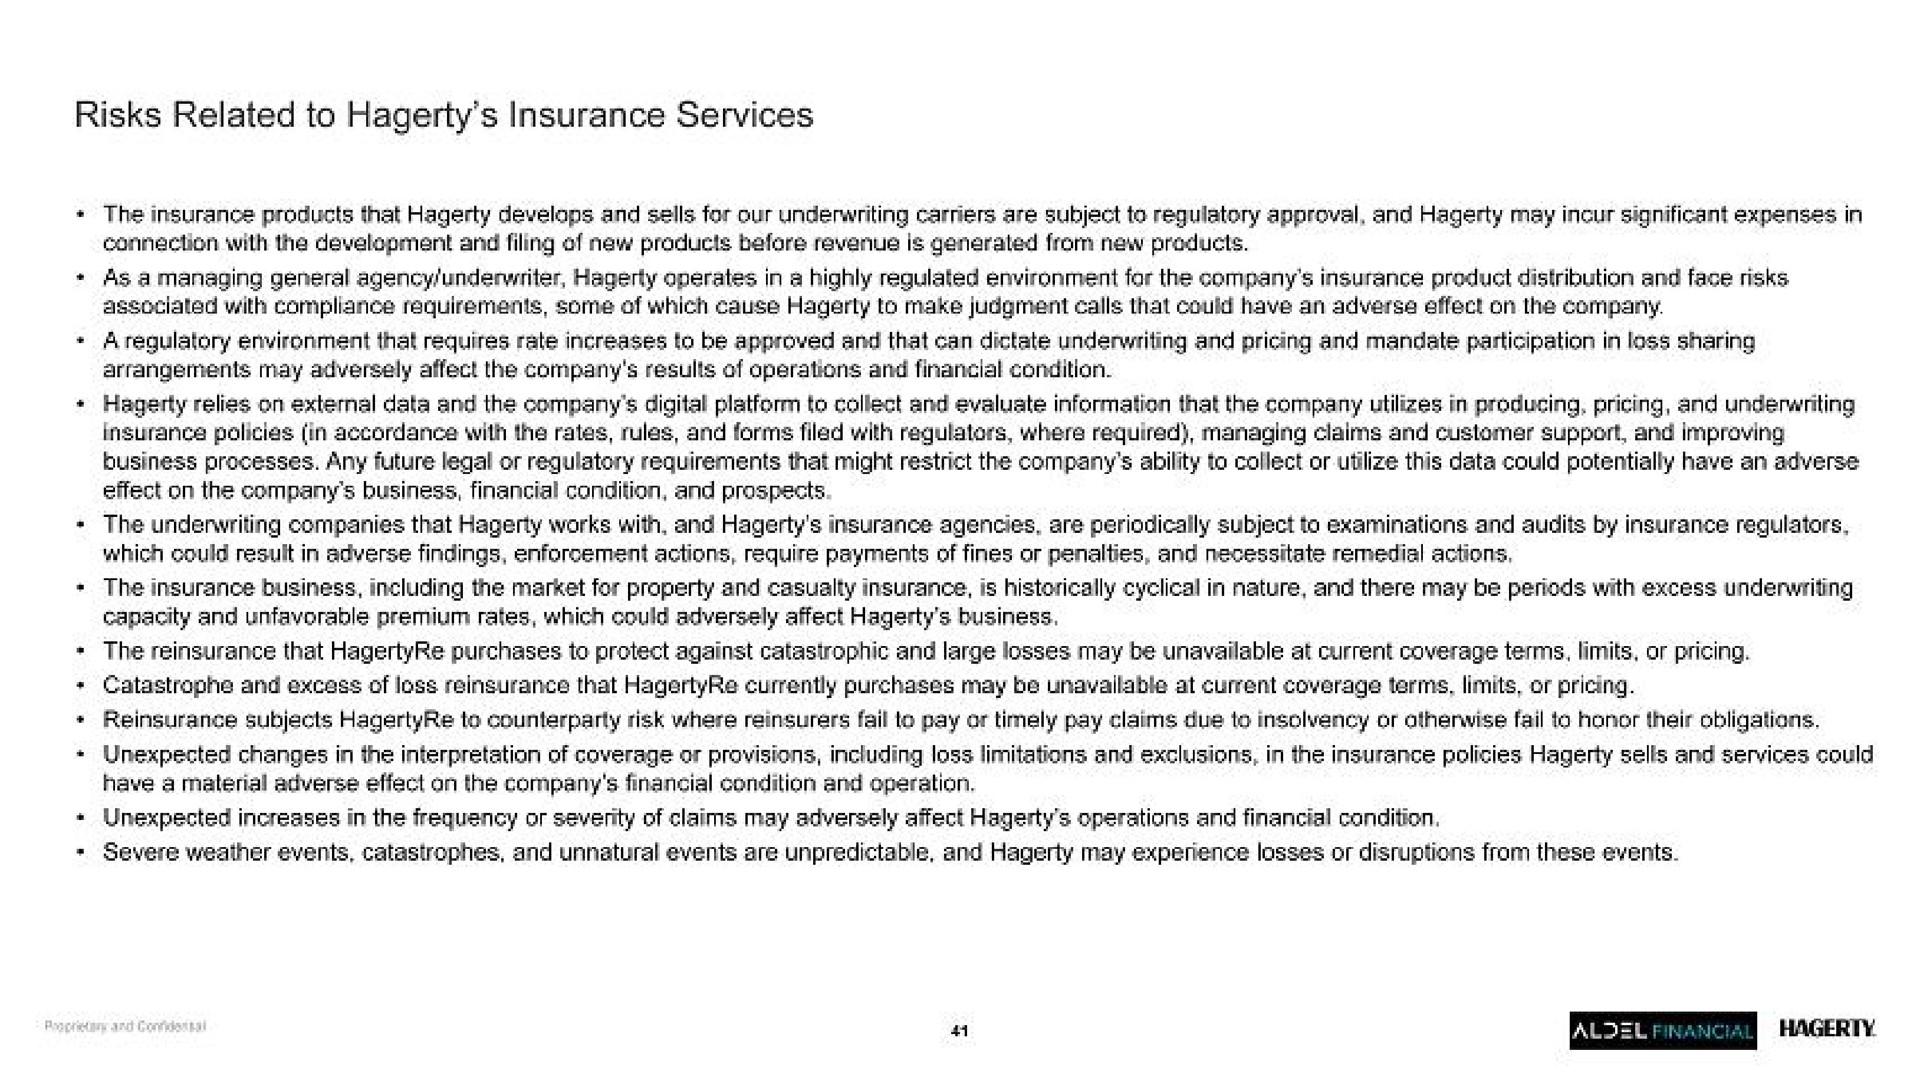 risks related to insurance services | Hagerty